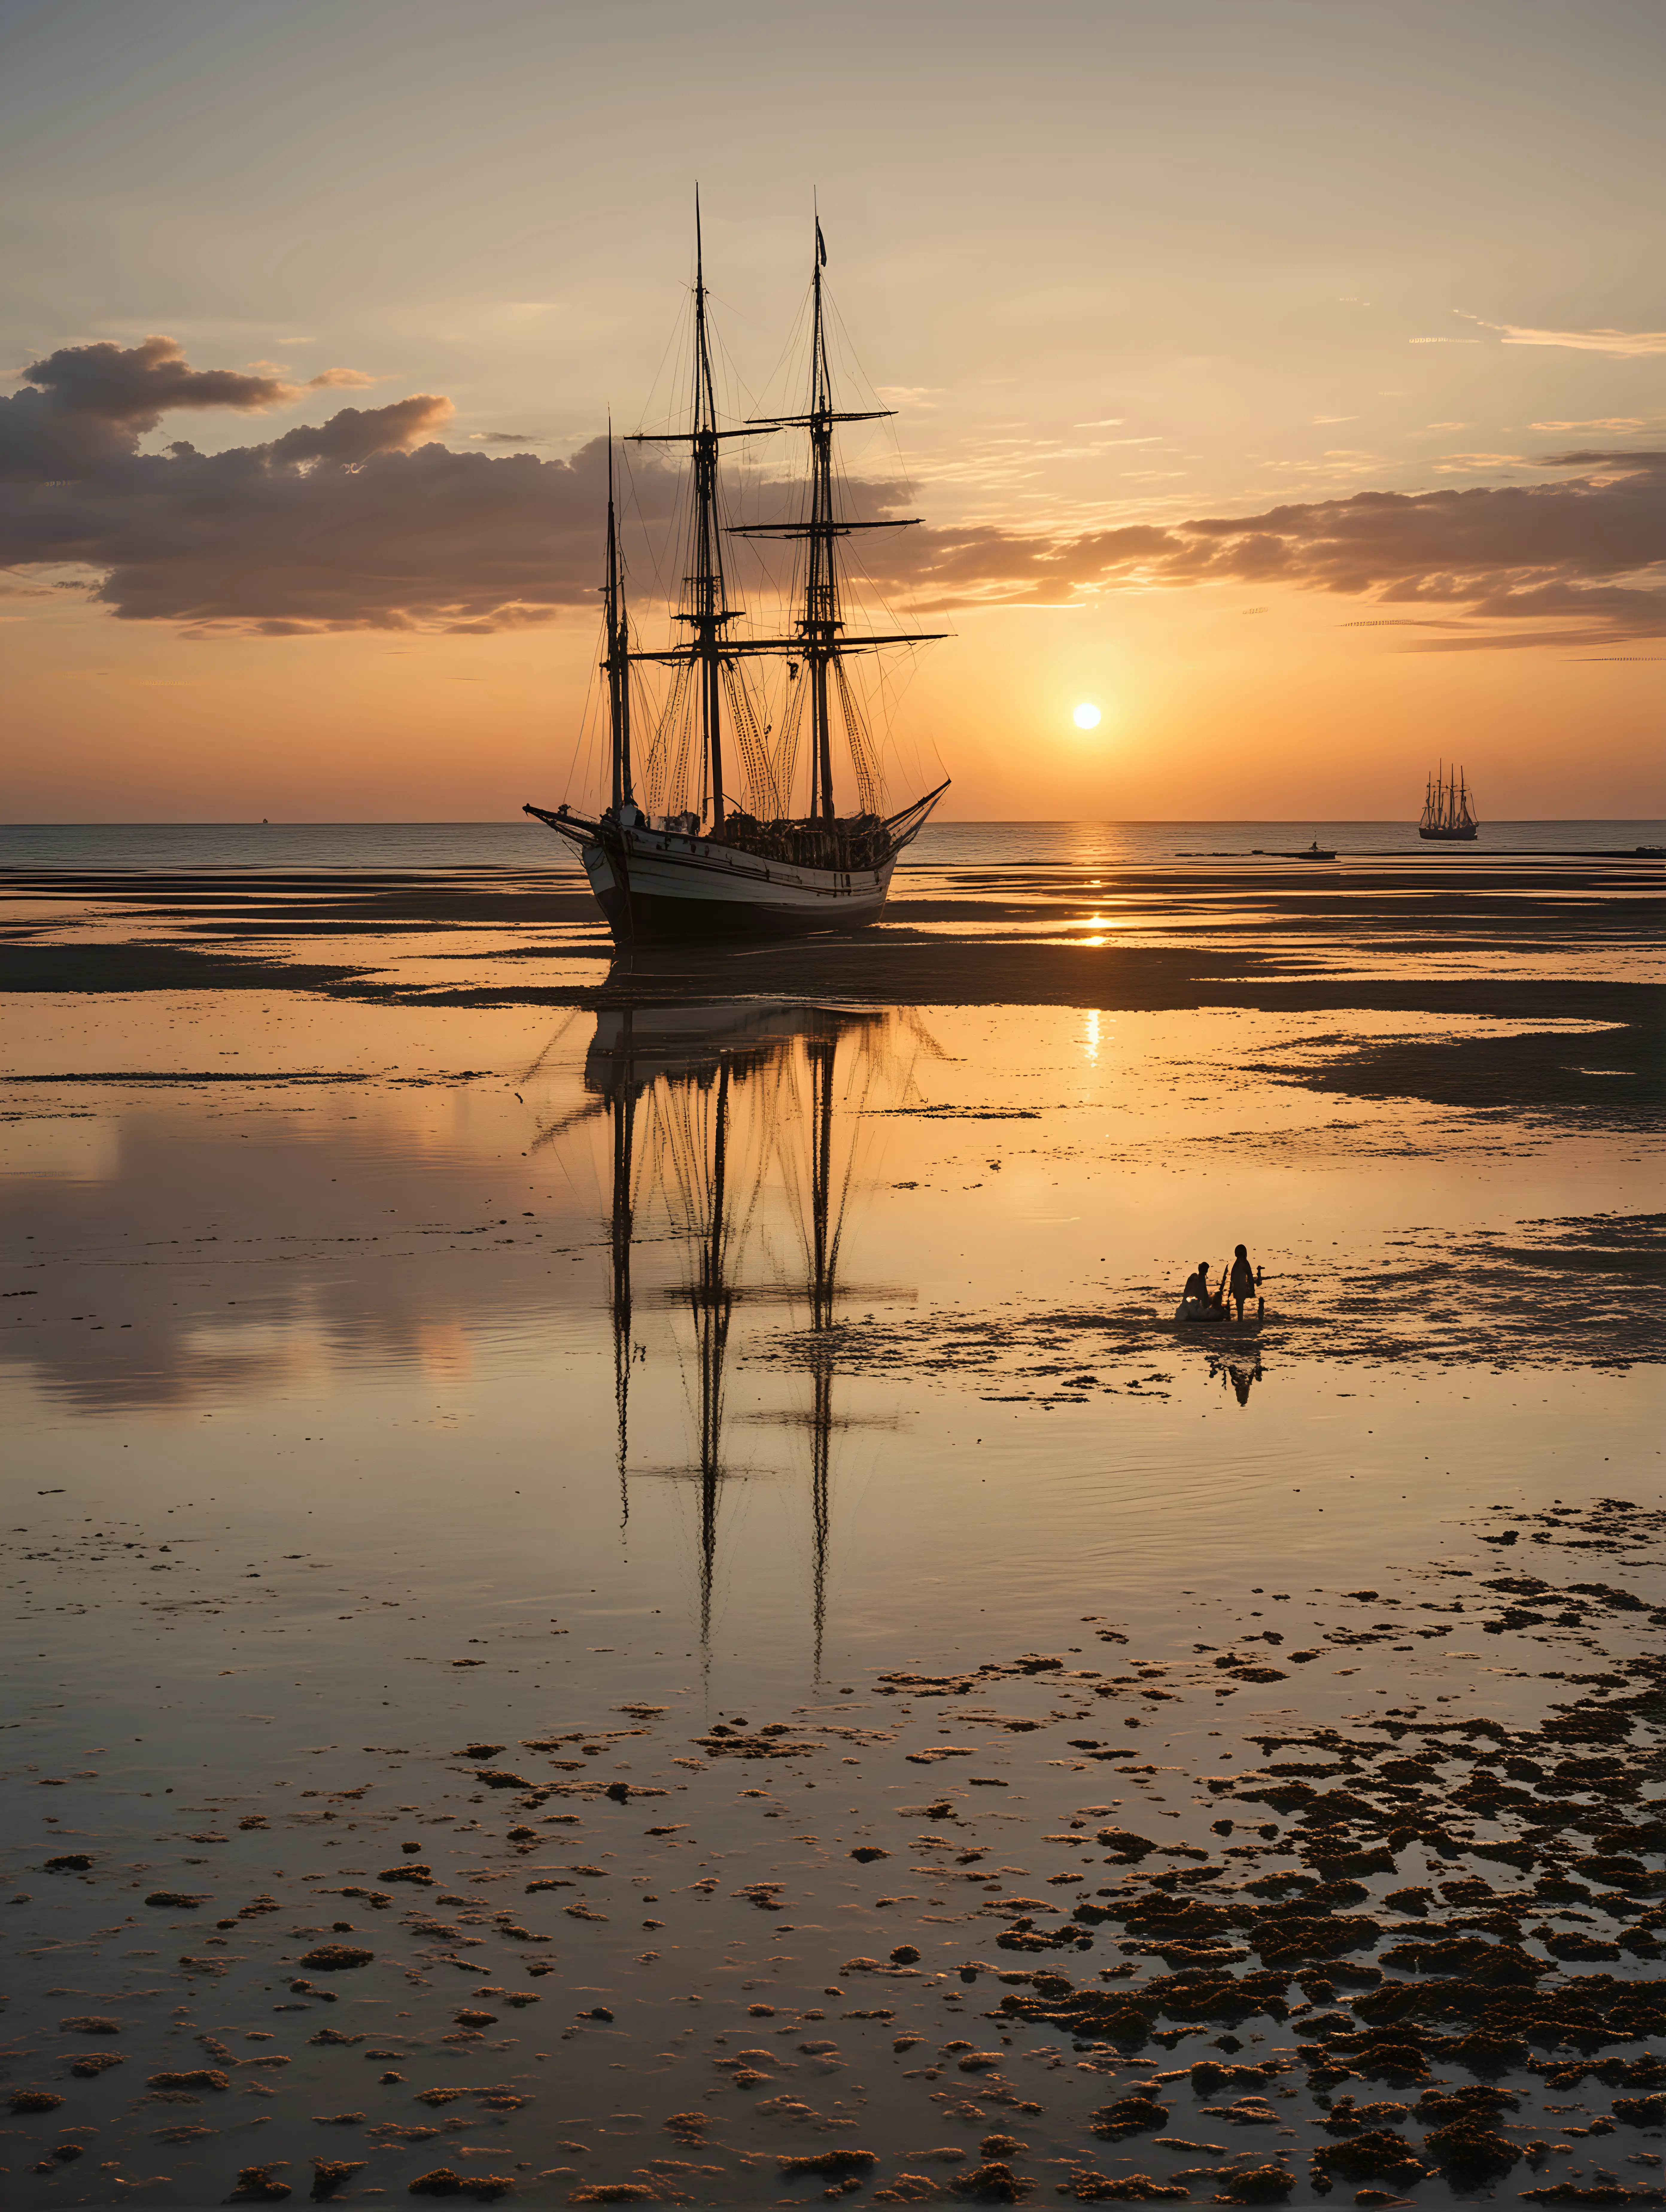 Sunset Seascape with Figures and Sailing Ships